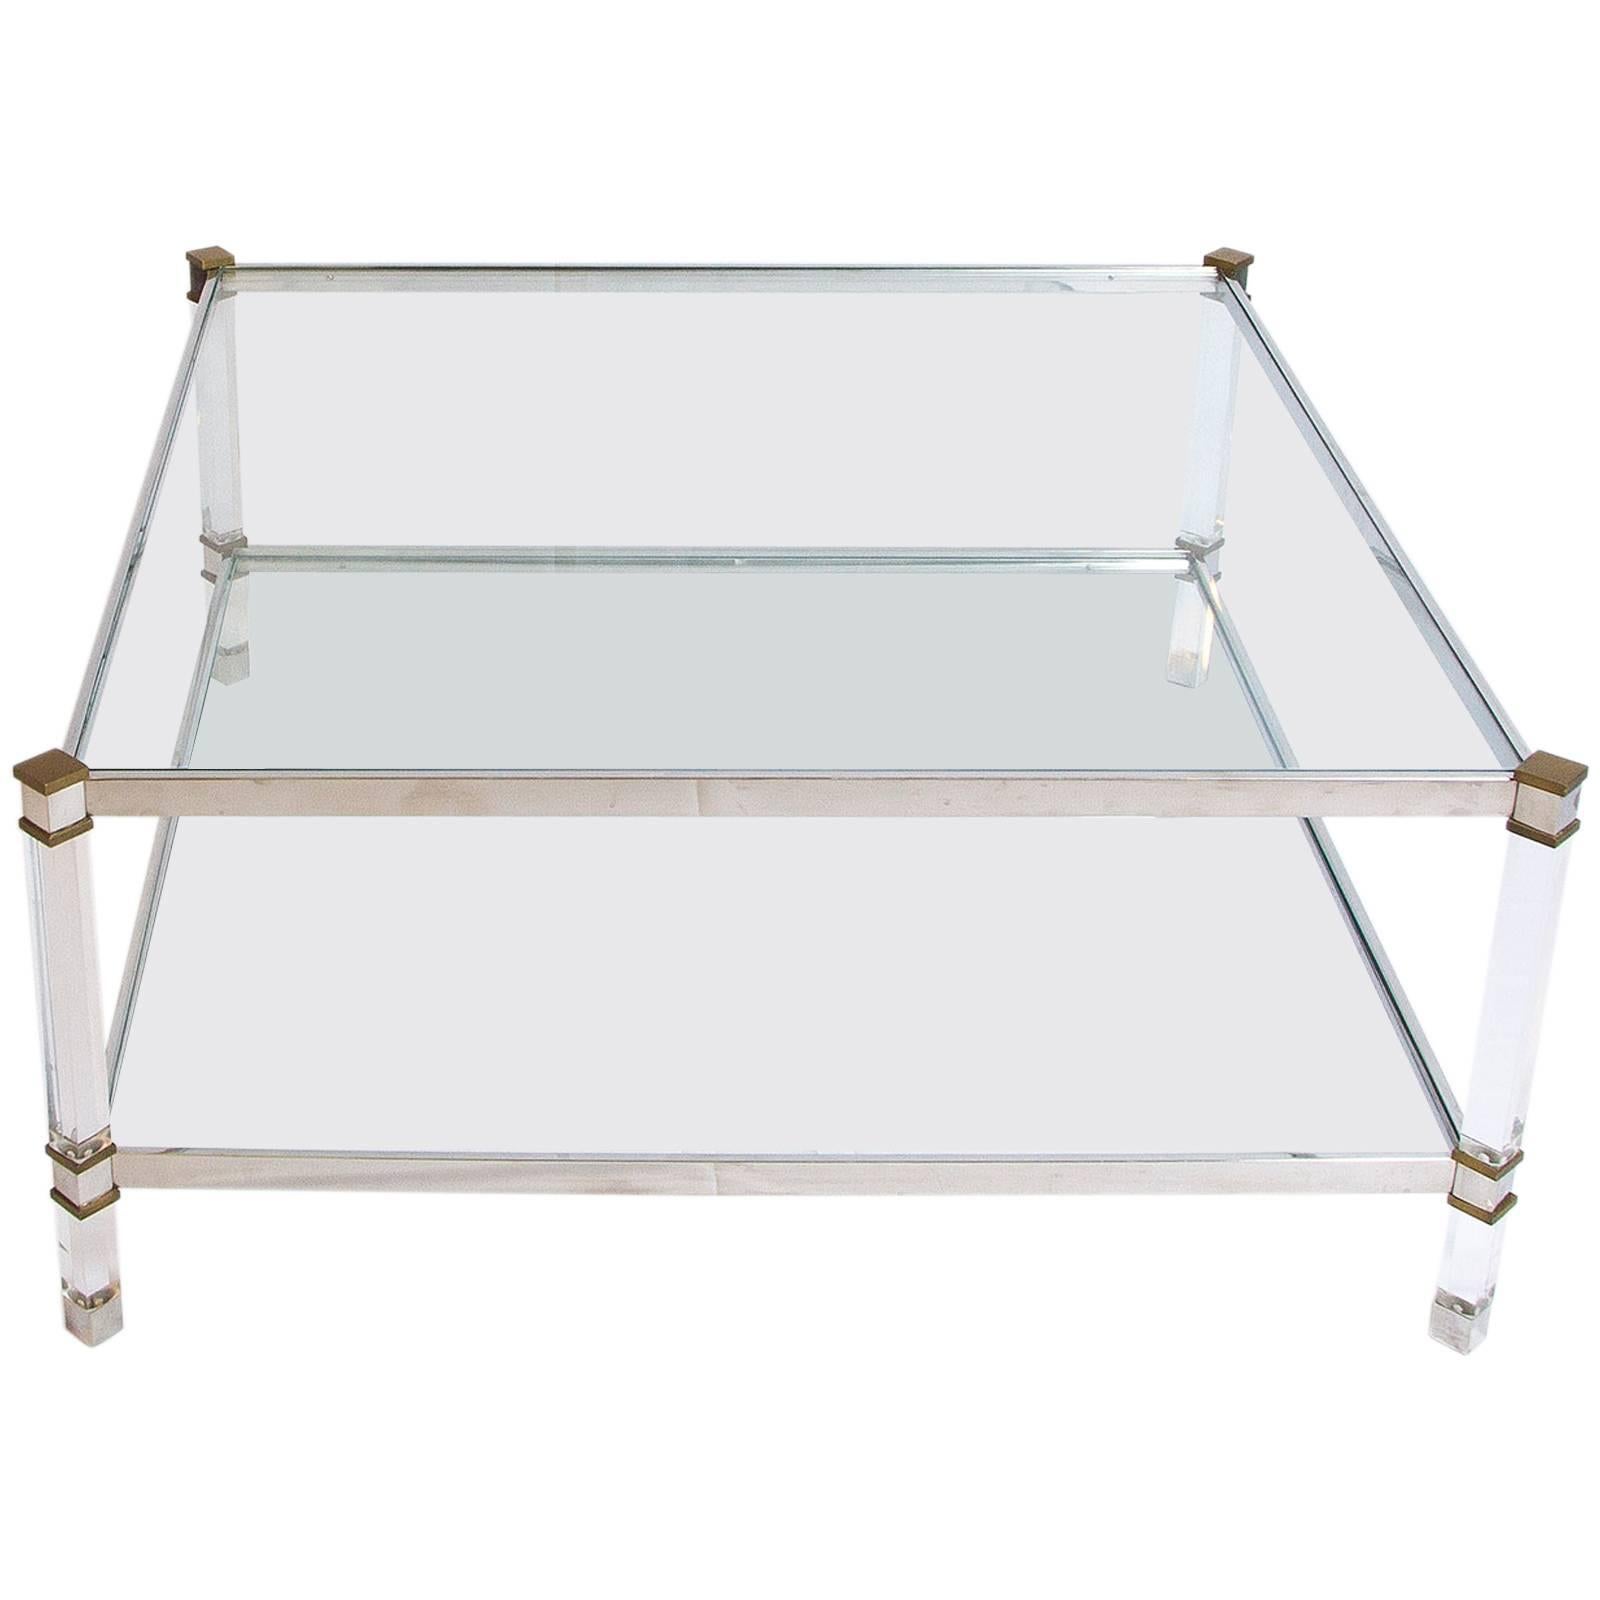 Two-Tier Lucite Brass and Aluminum Coffee Table